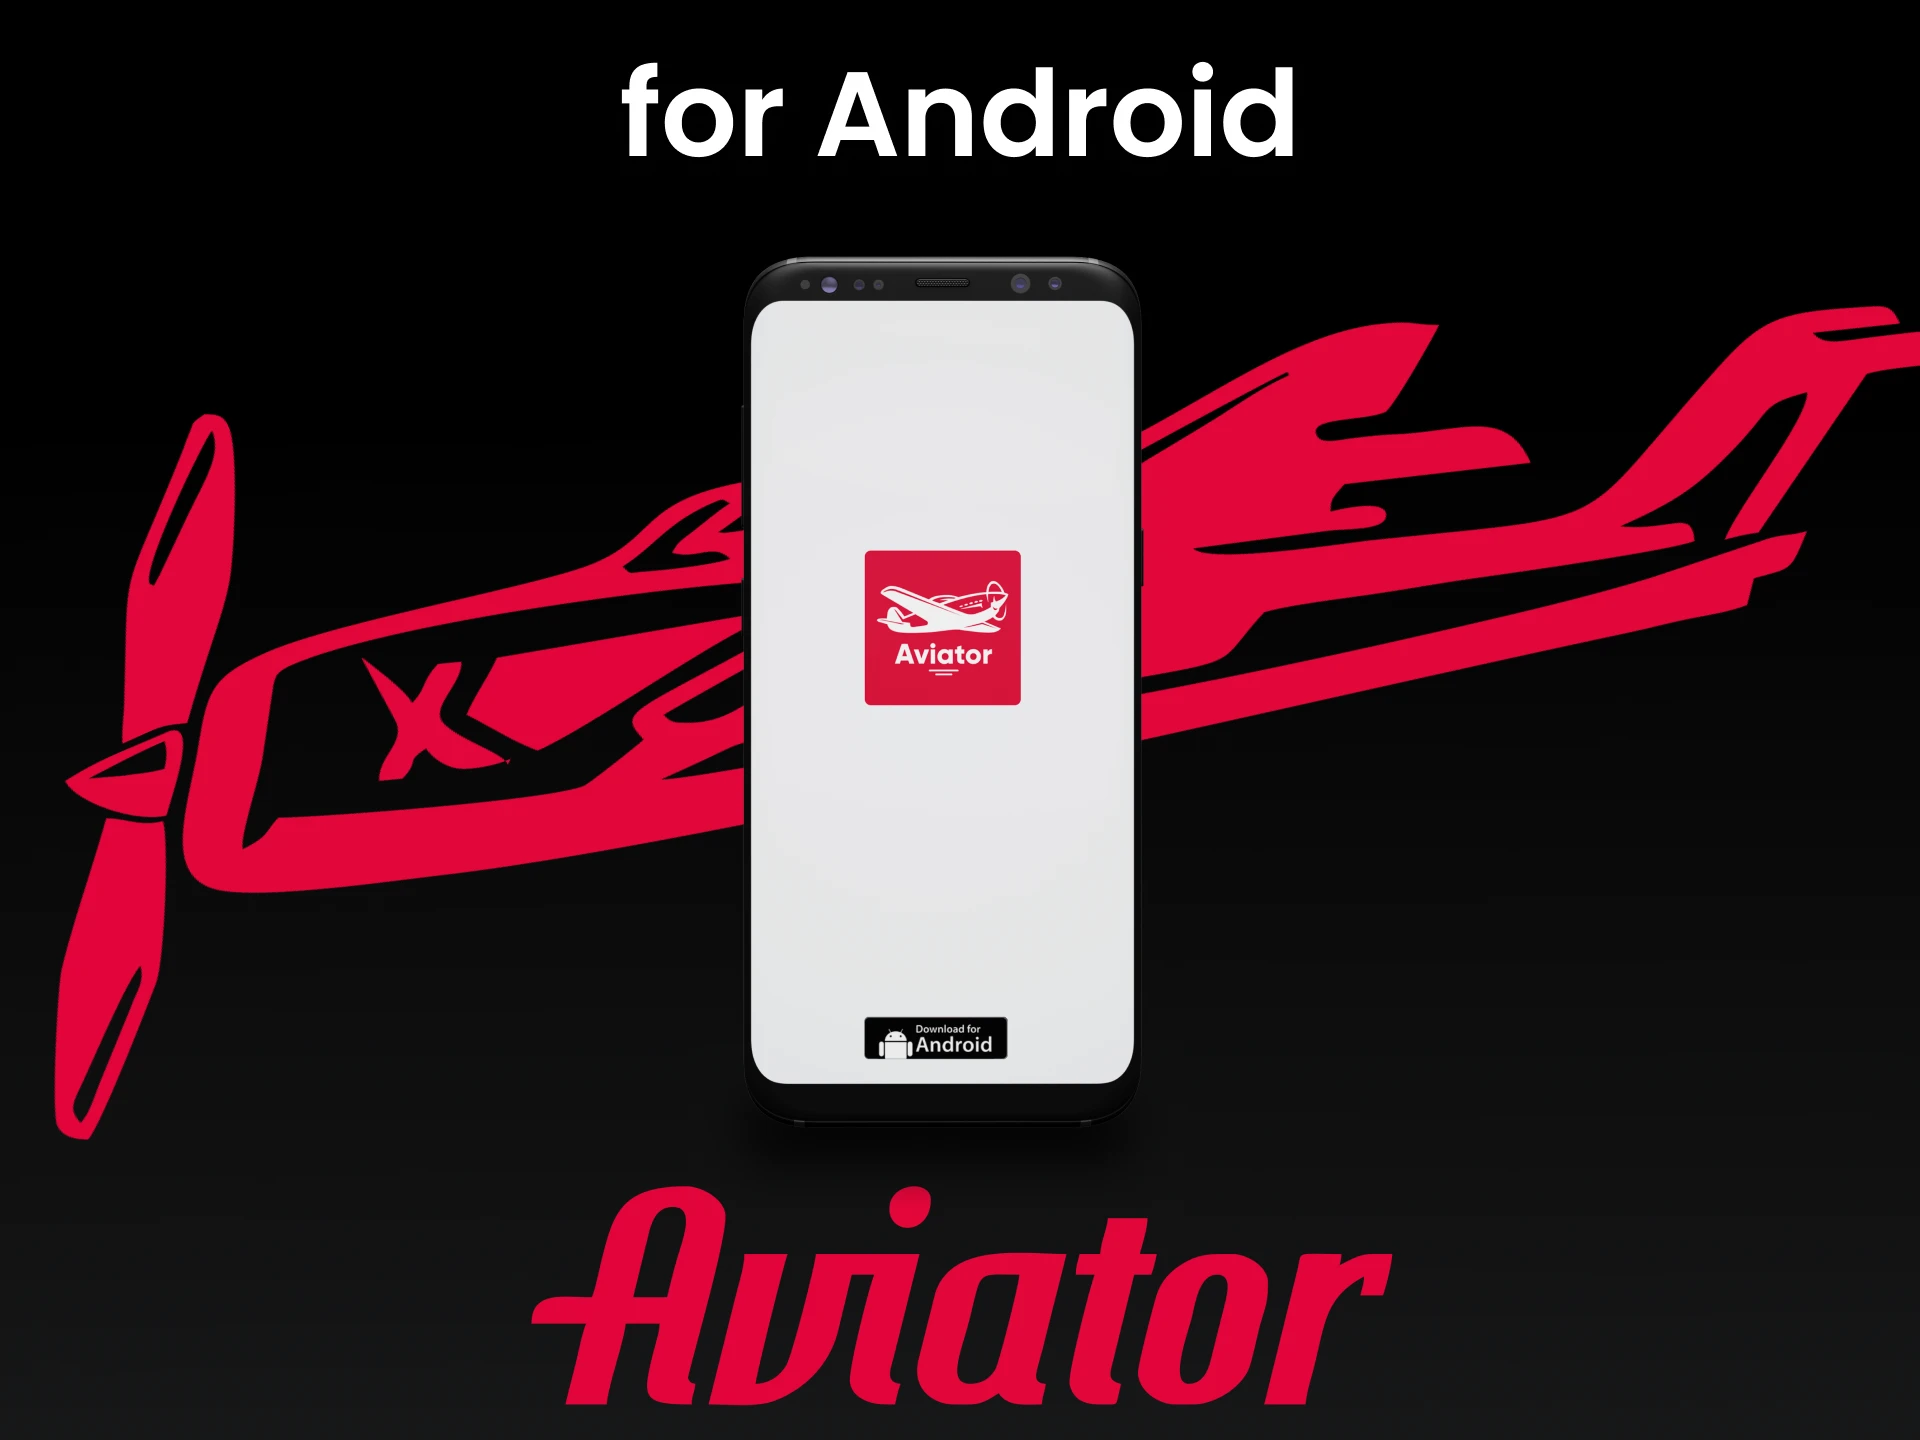 Download APK and play Aviator on Android devices.